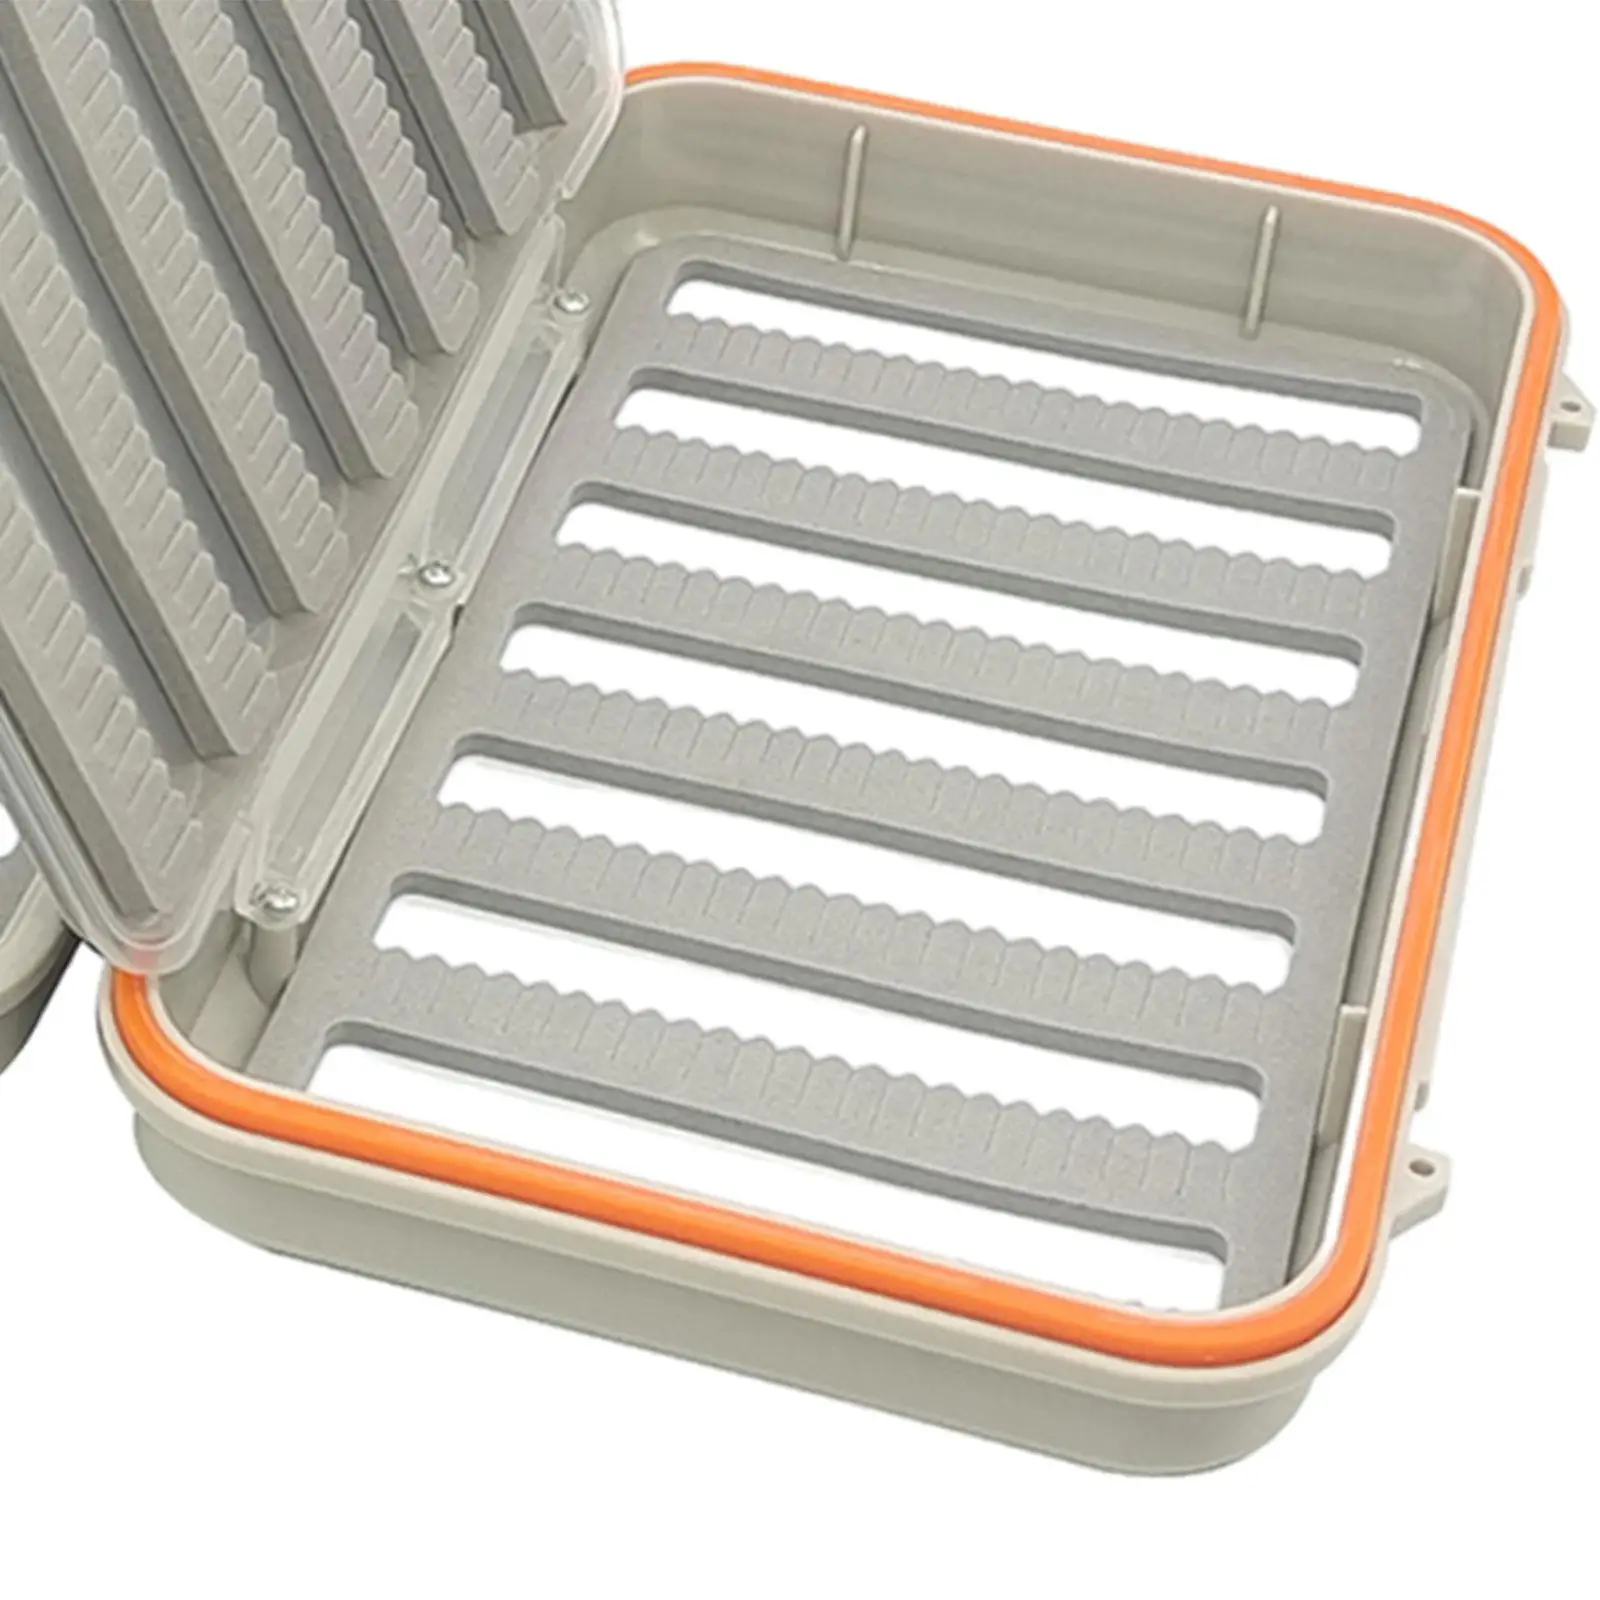 Waterproof Fly Box Organizer Fly Fishing Storage Case for Bass Trout Gear Dry